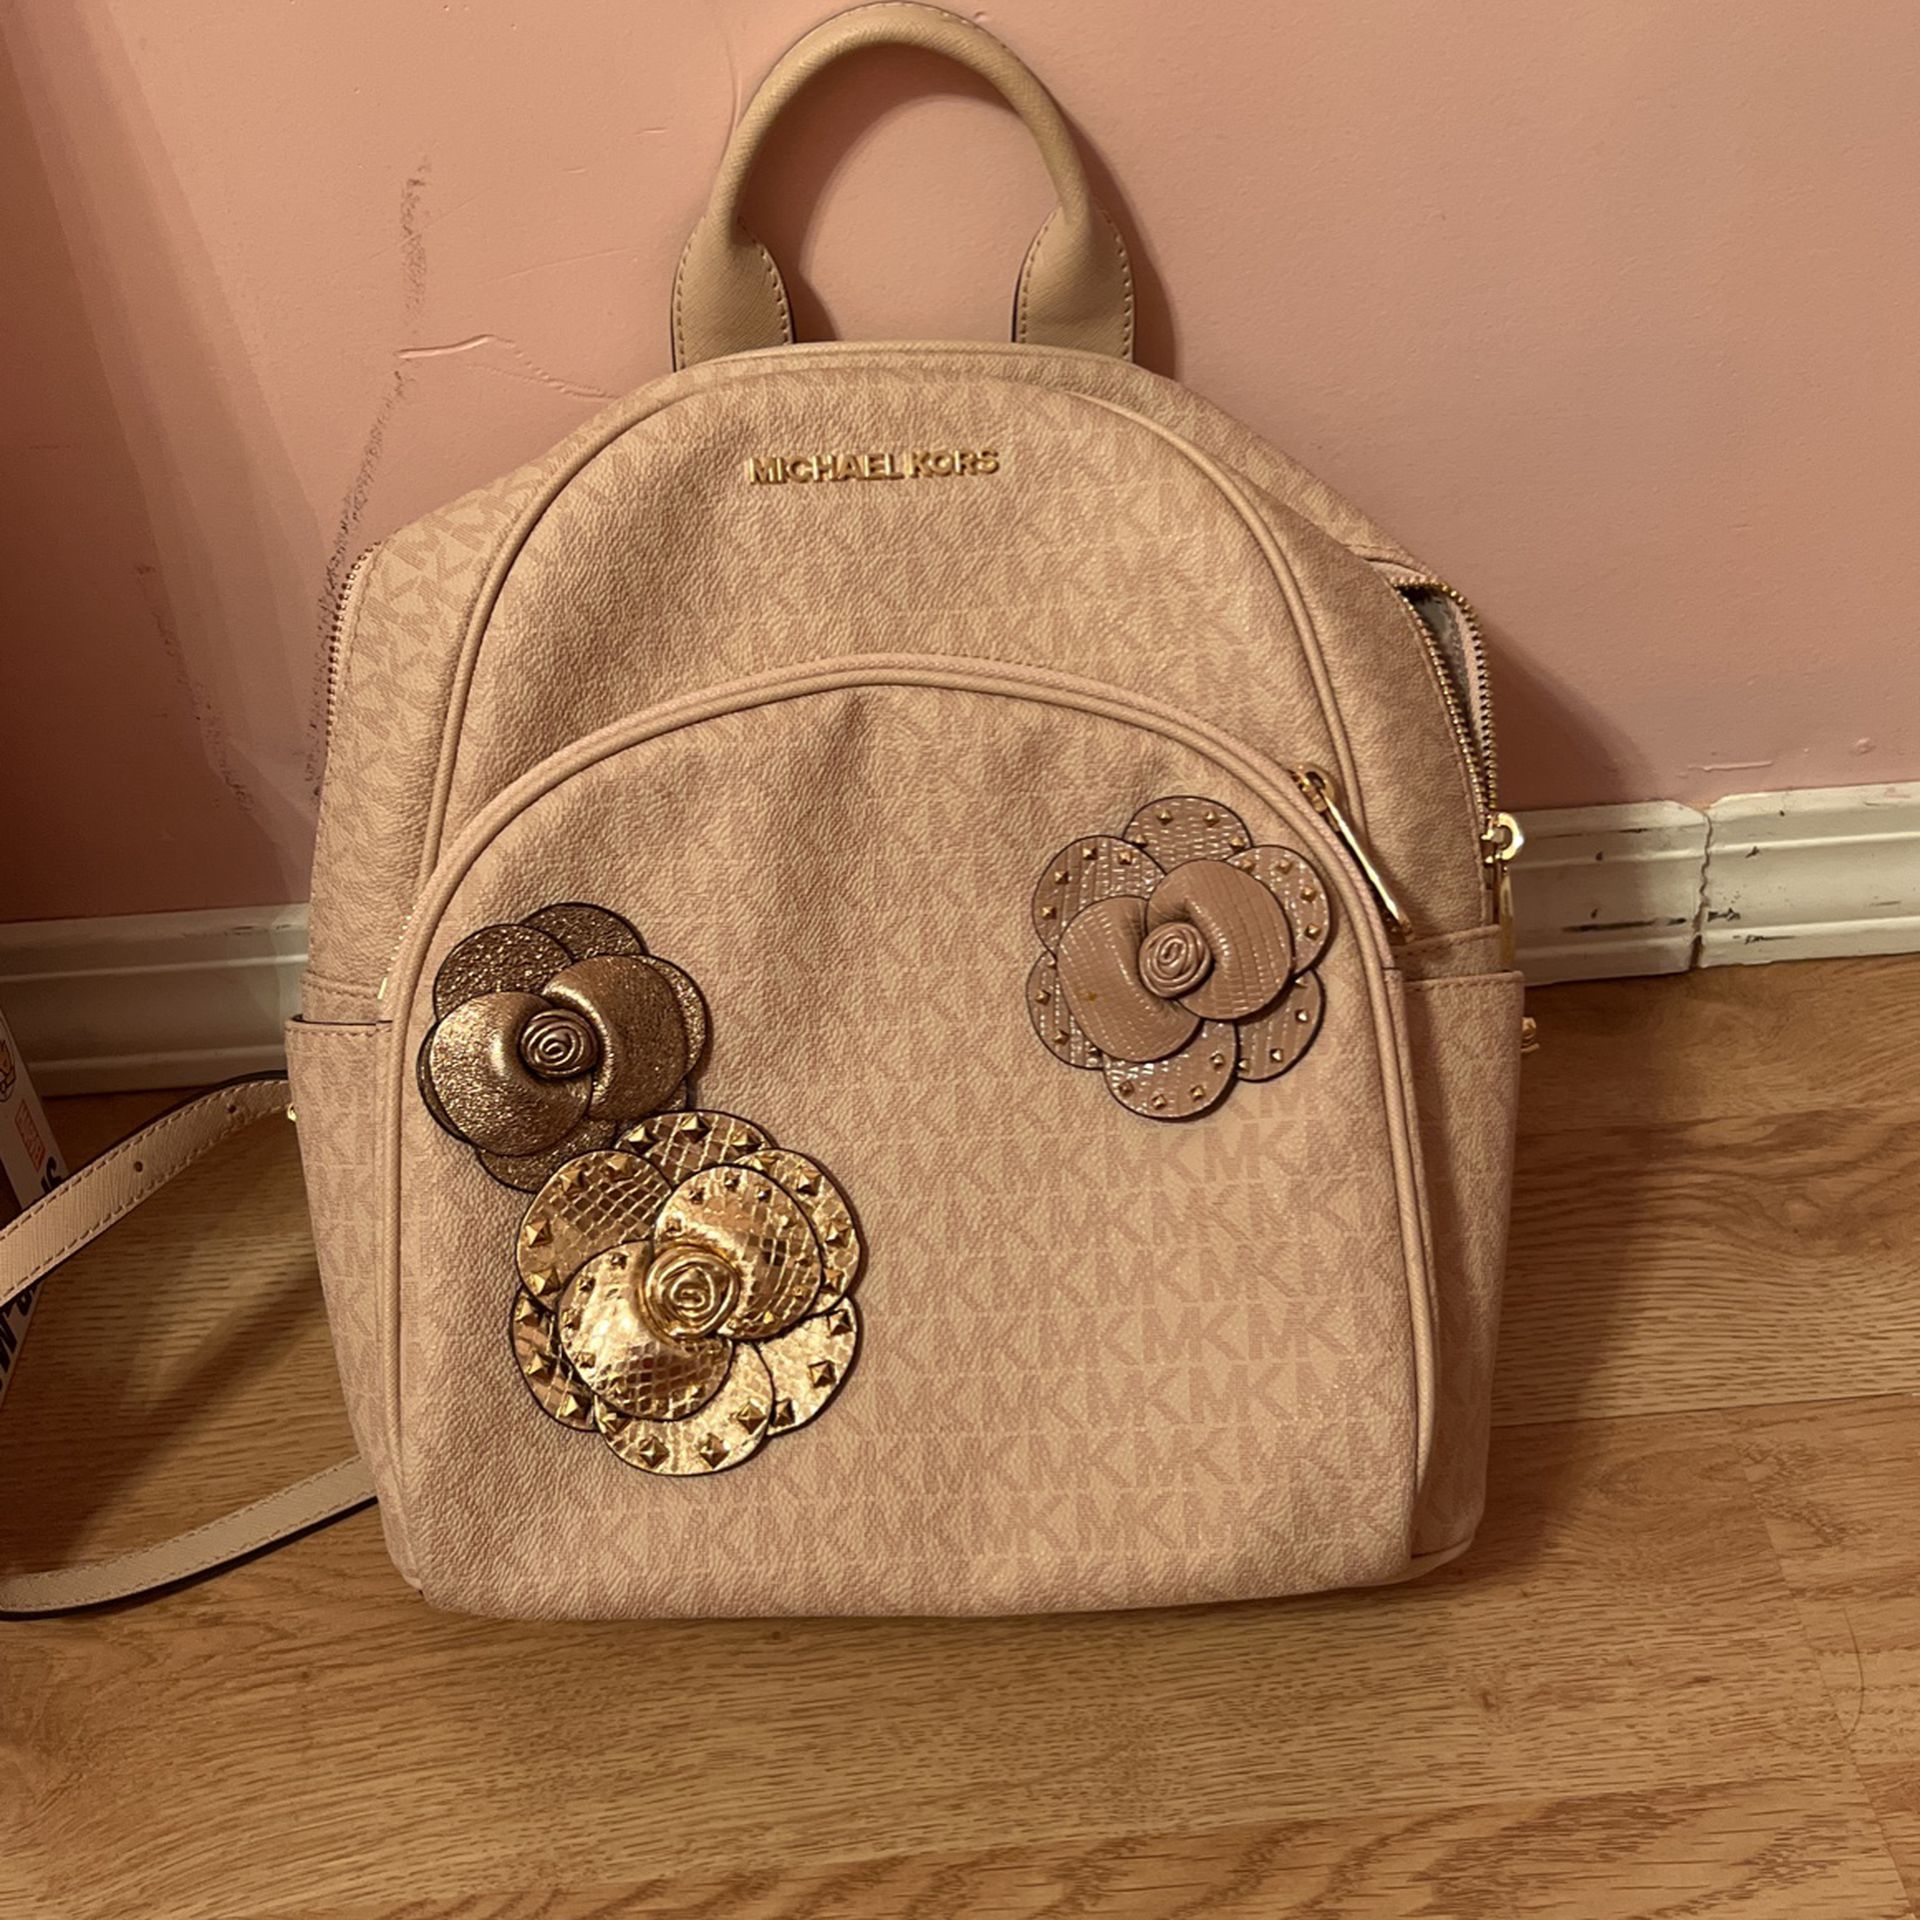 Pink Michael Kors Flower backpack for Sale in West Chicago, IL - OfferUp